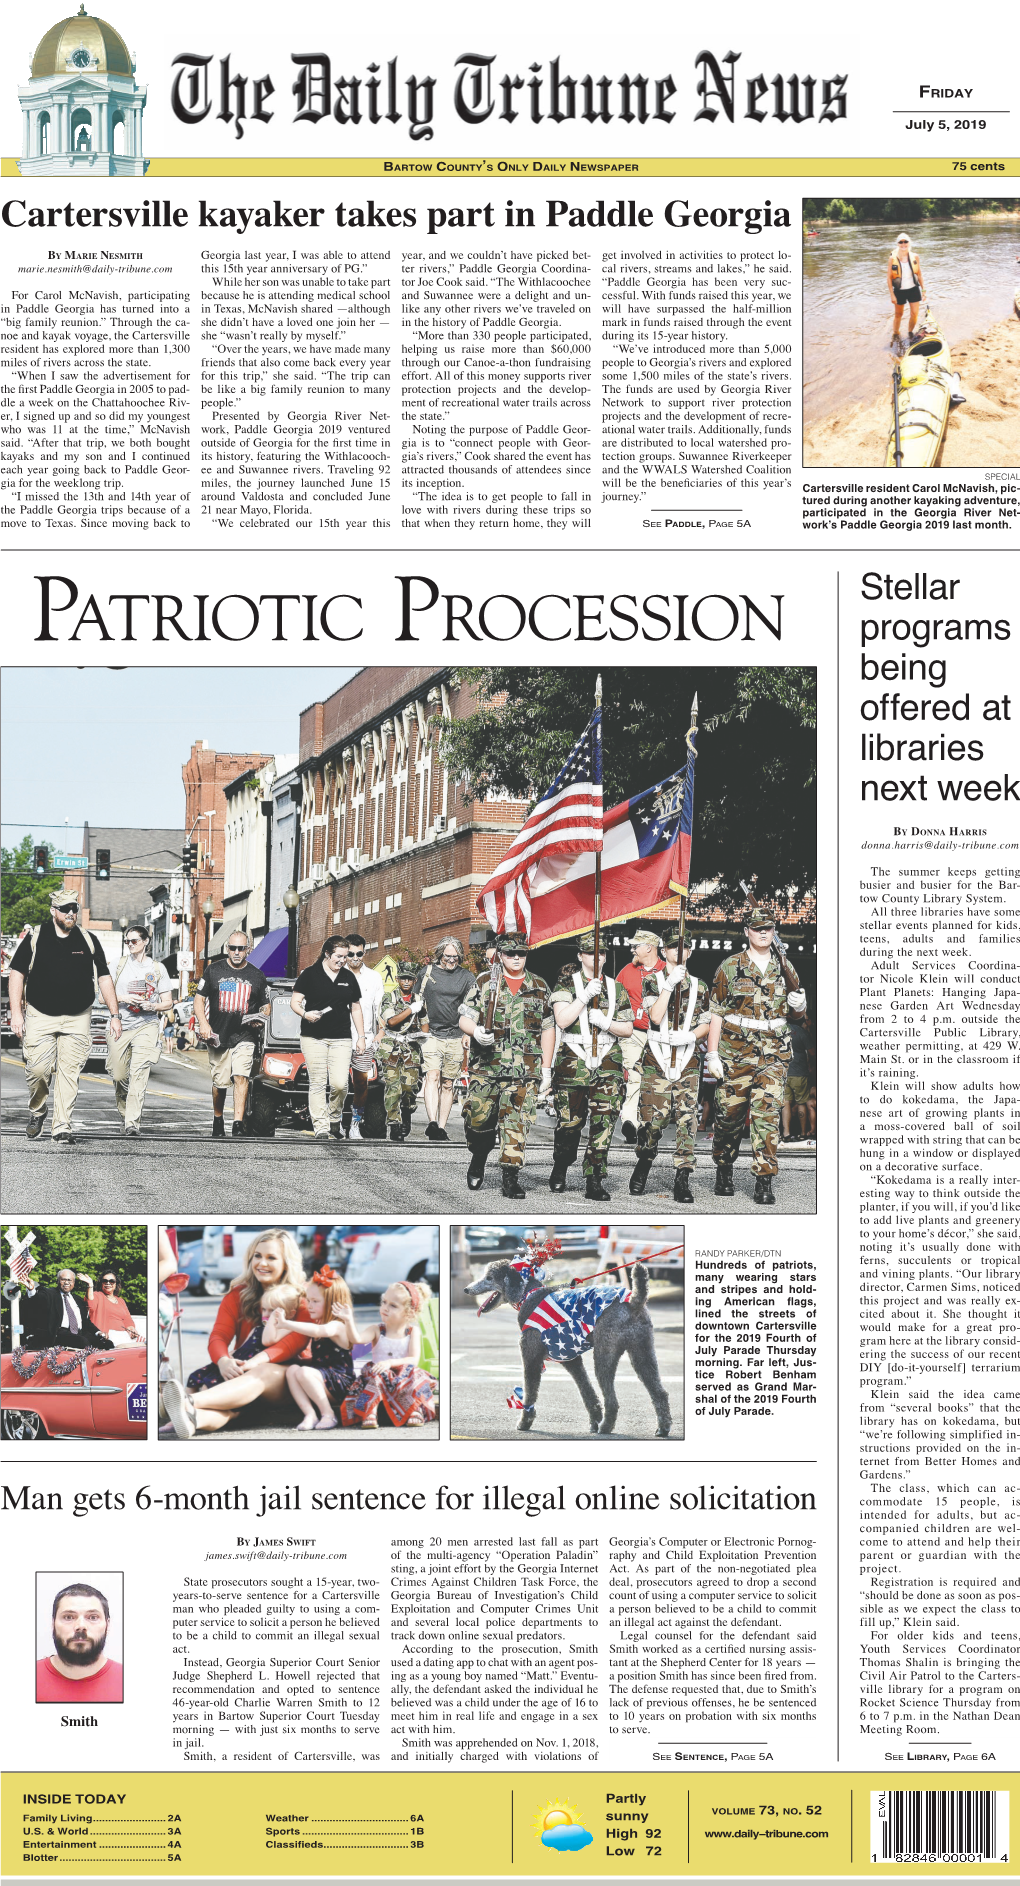 PATRIOTIC PROCESSION Programs Being Offered at Libraries Next Week